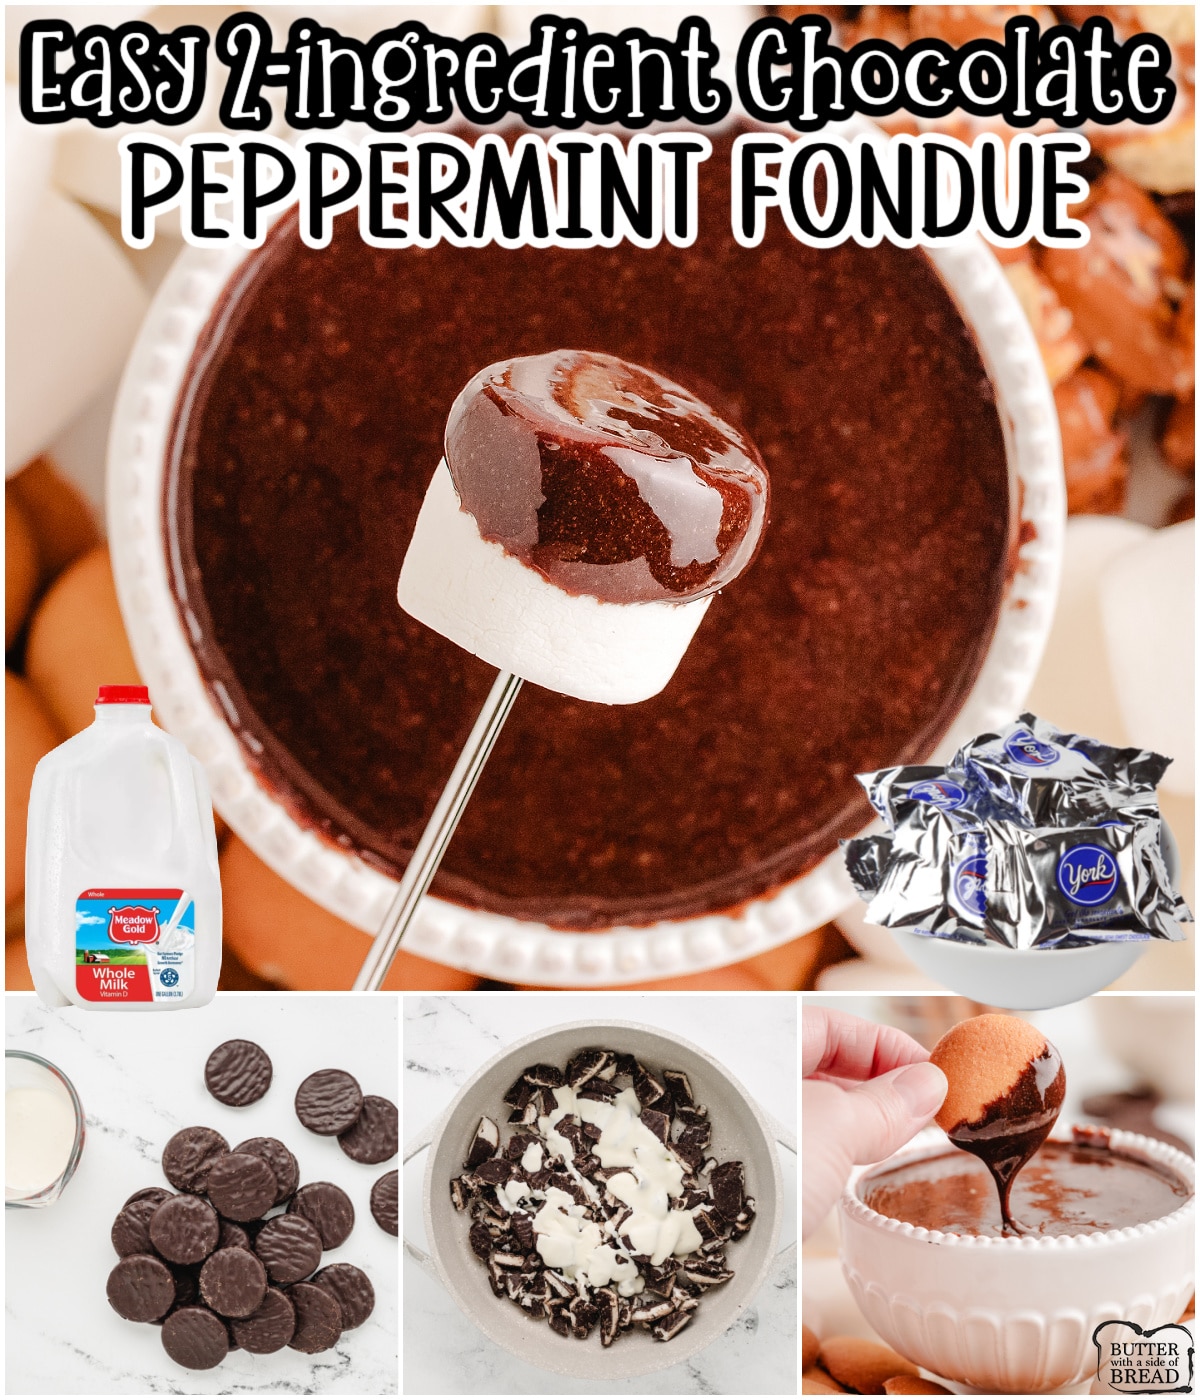 Peppermint Fondue made easy with just chocolate peppermint patties & milk! Decadent chocolate fondue that is perfect for fruit, cookies, or even marshmallows.